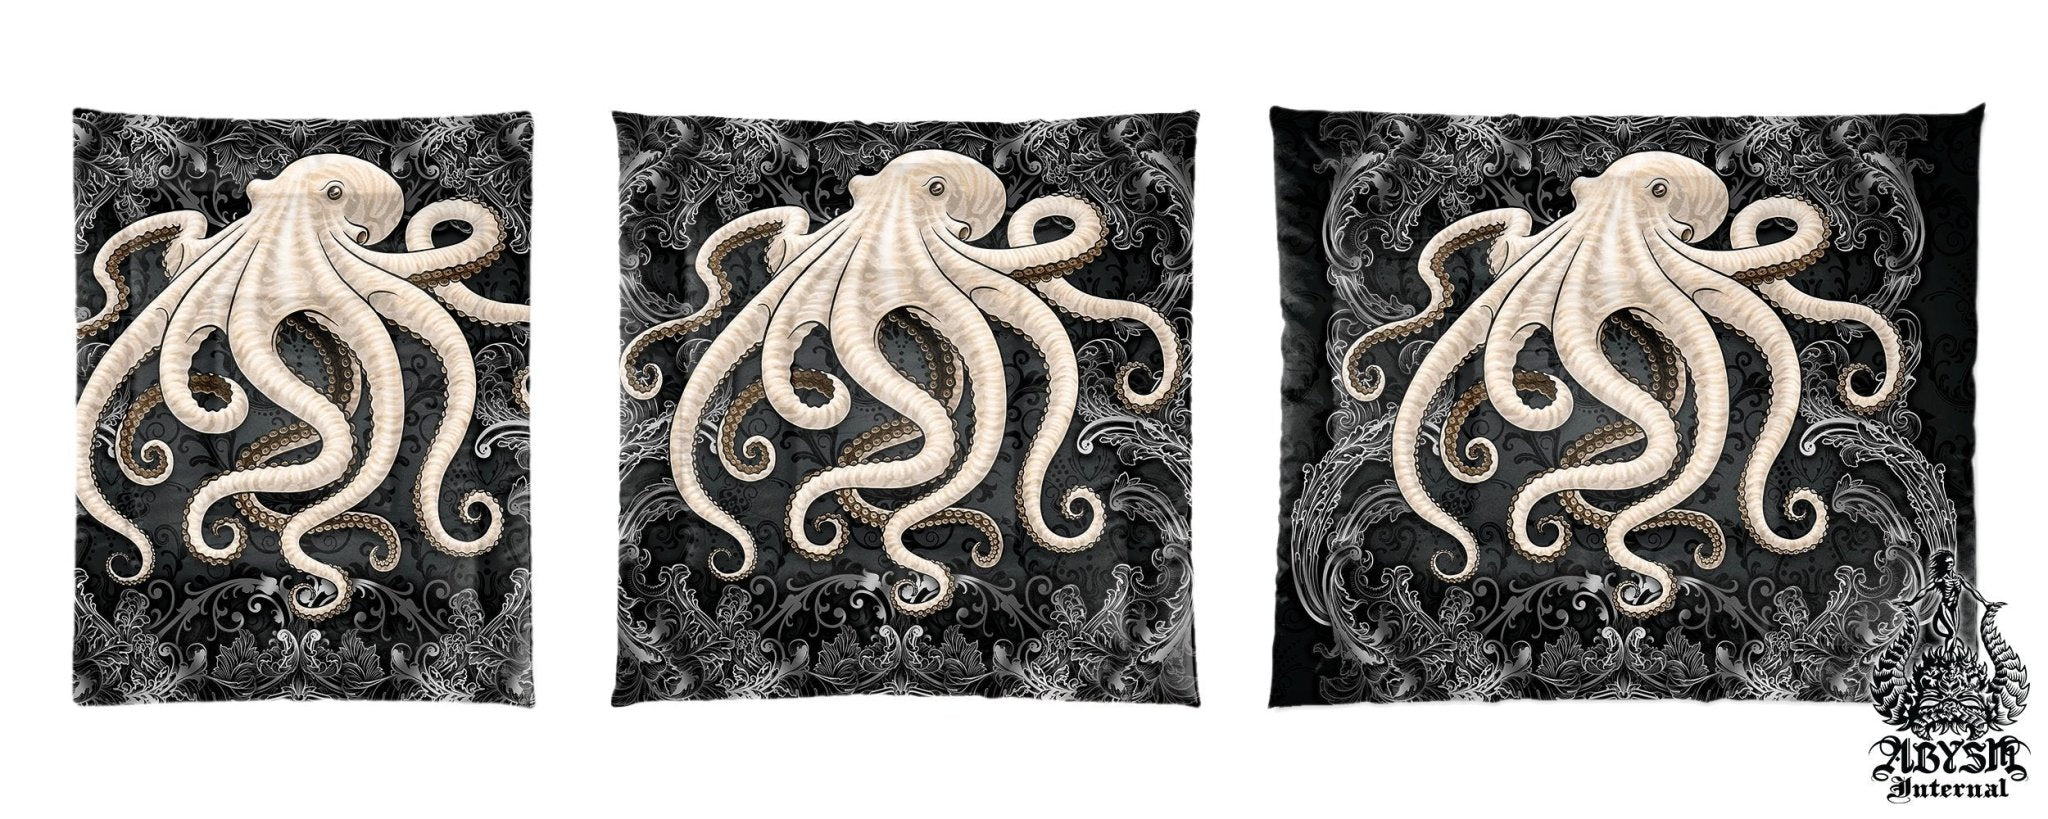 Octopus Bedding Set, Comforter and Duvet, Goth Bed Cover, Coastal Bedroom Decor, King, Queen and Twin Size - Tentacles, Dark, Black and White, - Abysm Internal